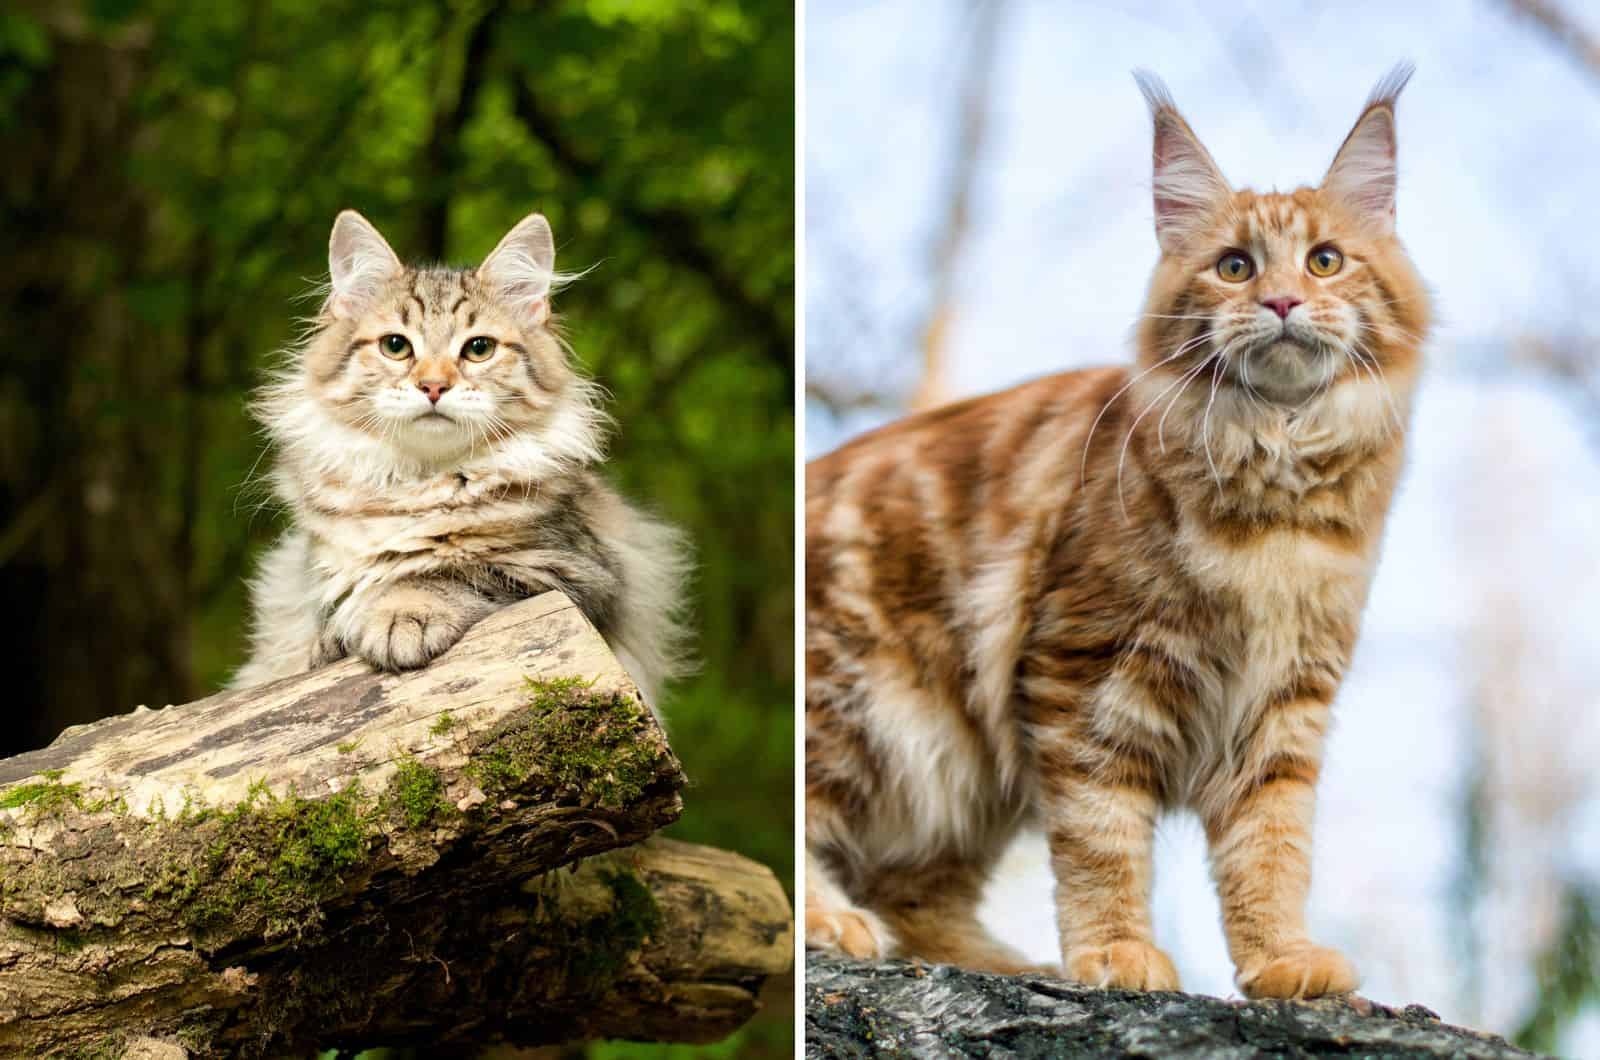 Siberian Cat and Maine Coon Cat side by side